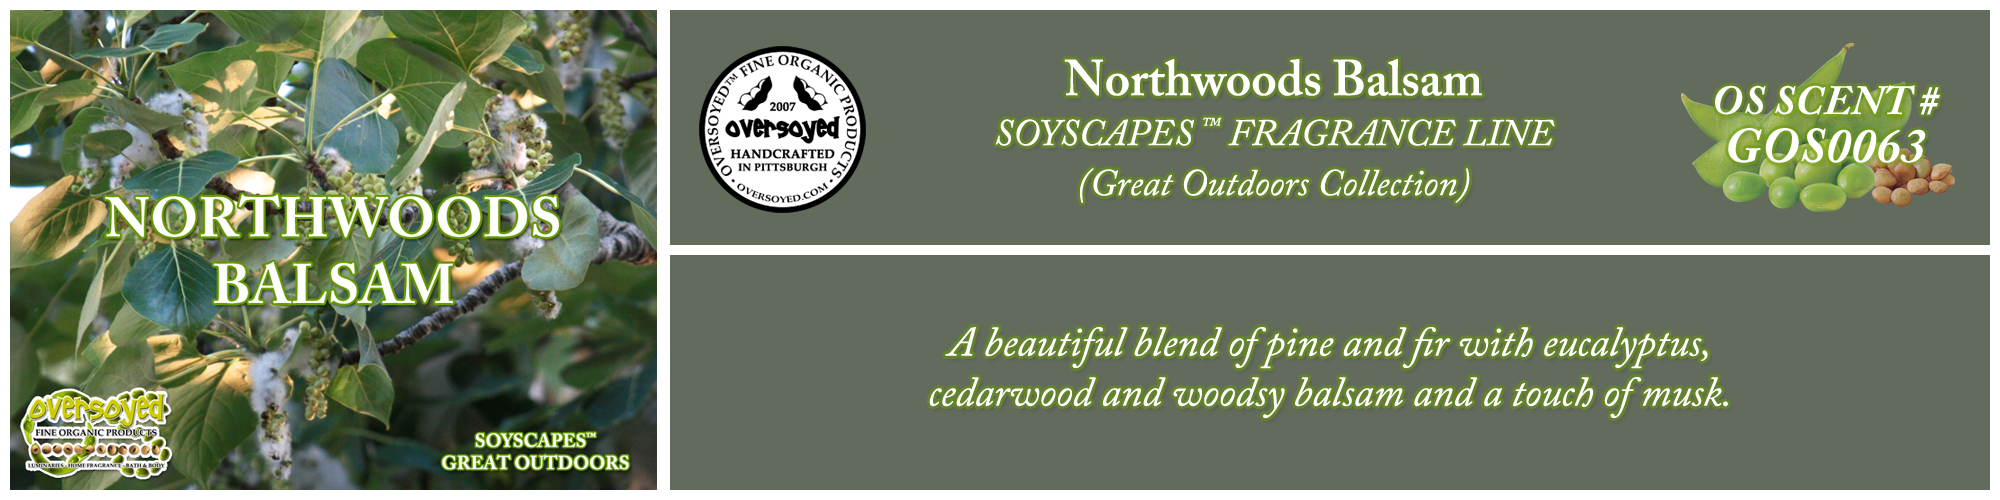 Northwoods Balsam Handcrafted Products Collection